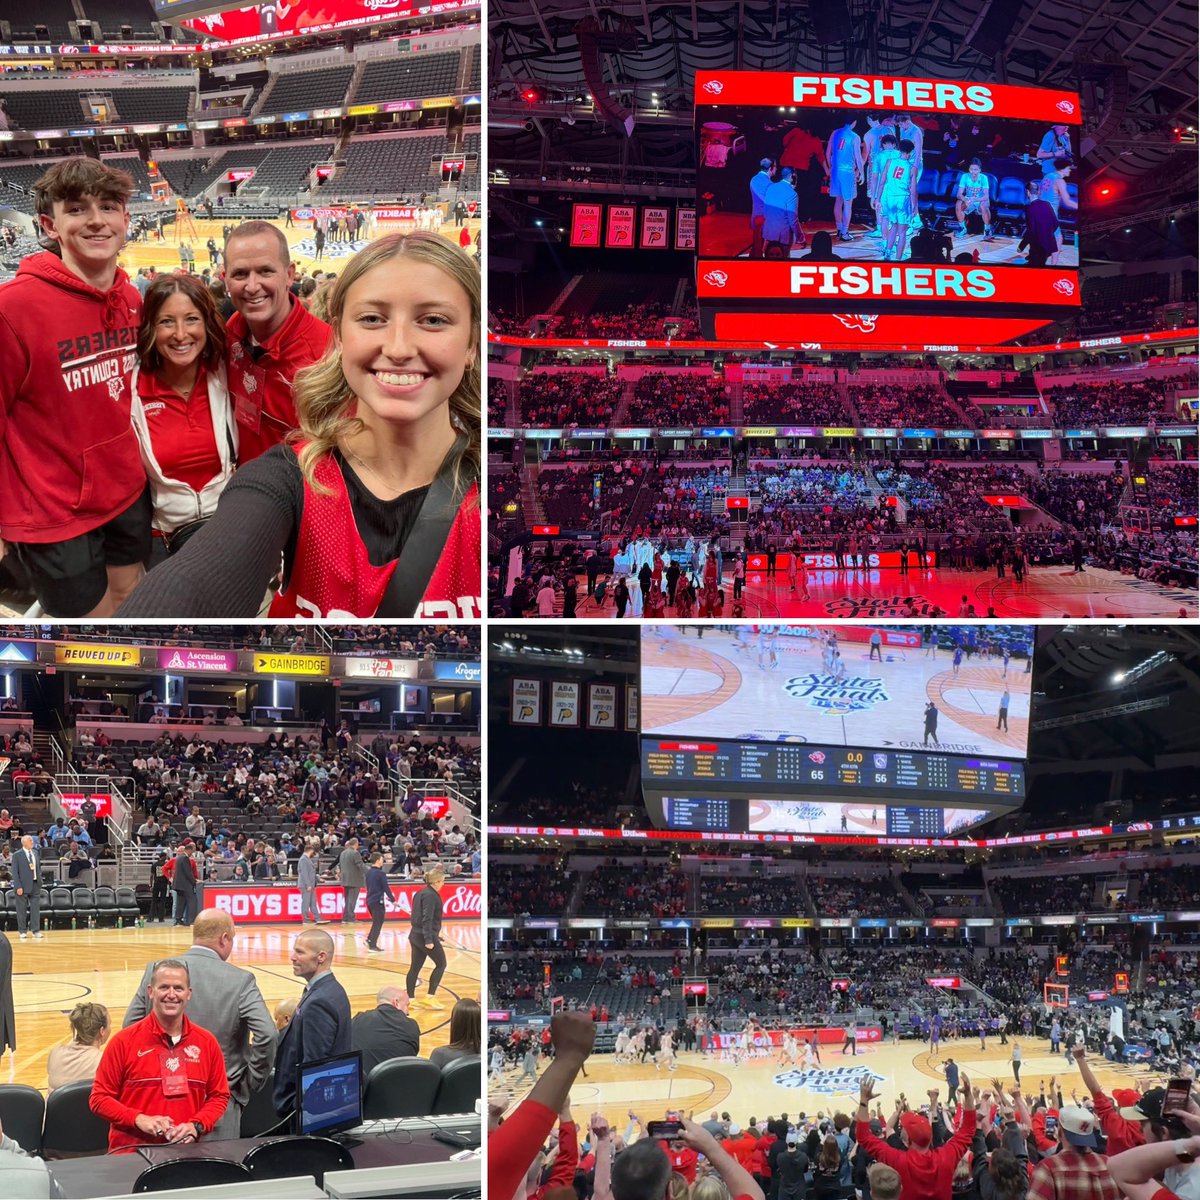 What a night!🎉 Congrats to the @FHSTigers for bringing home the State Champion! ❤️🐯🏀 Loved seeing all the Watch Parties on Spring Break! Appreciated our community that rearranged plans to cheer in person! Tiger Pride was felt from near & far!🥰 Now off to sunshine in Siesta!☀️